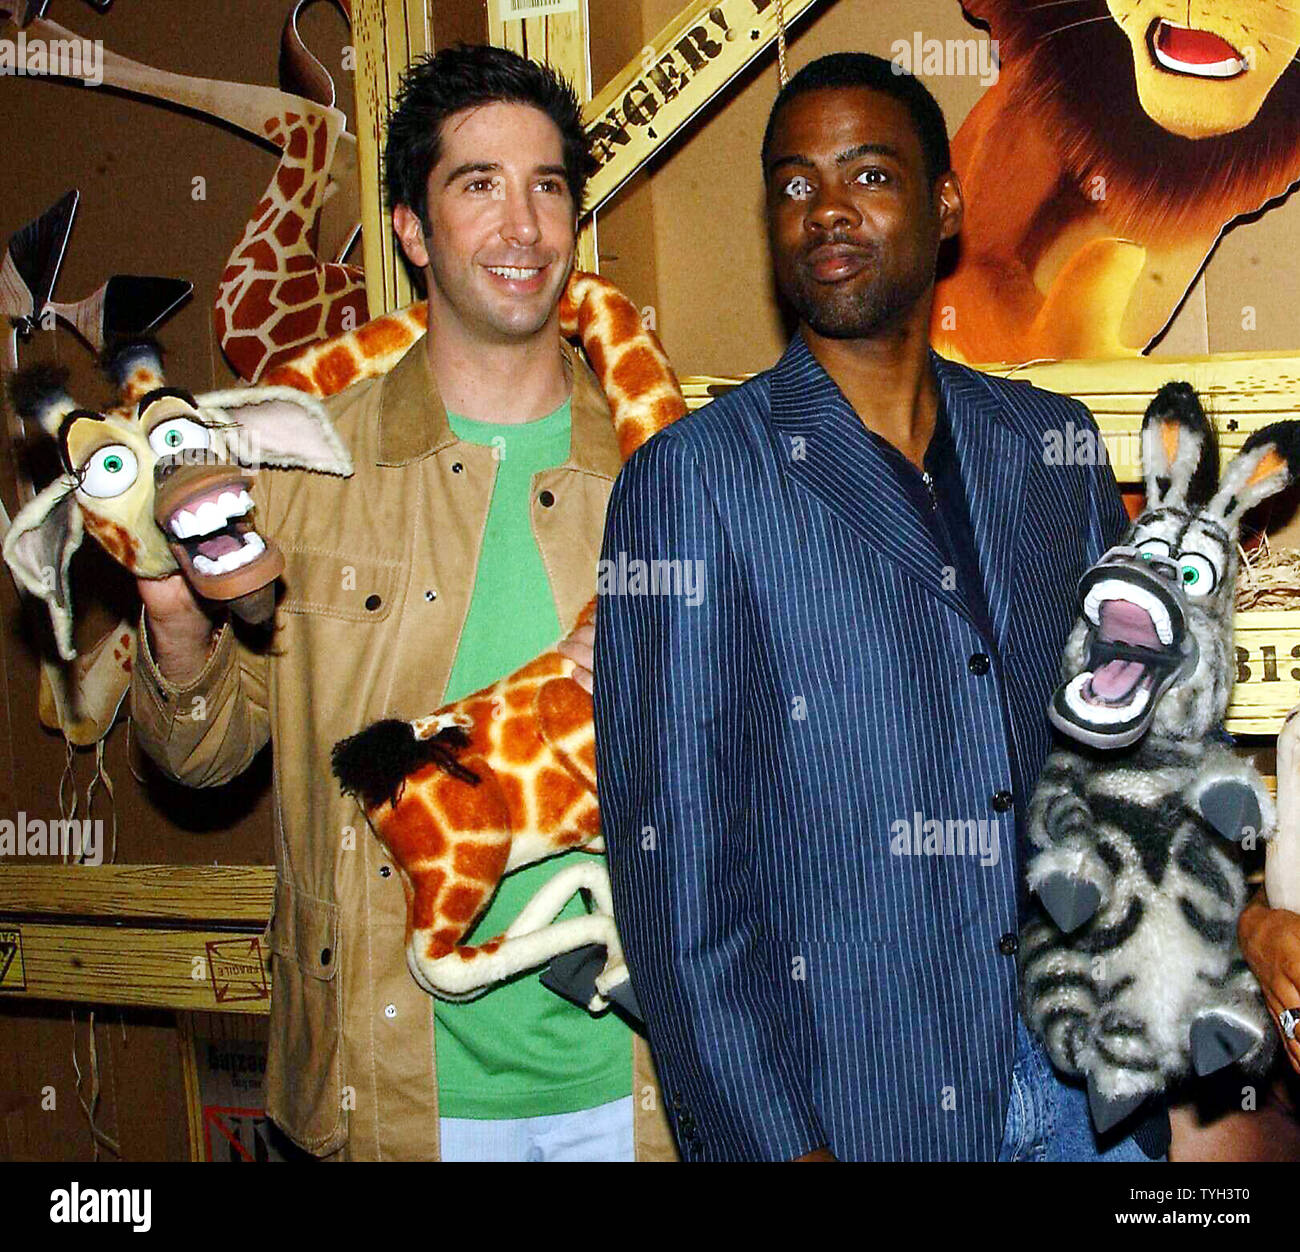 Actors David Schwimmer, Chris Rock (left to right) voice talent of the Dreamworks animated film 'Madagascar' arrive for the May 15, 2005 New York premiere of their film.  (UPI Photo/Ezio Petersen) Stock Photo